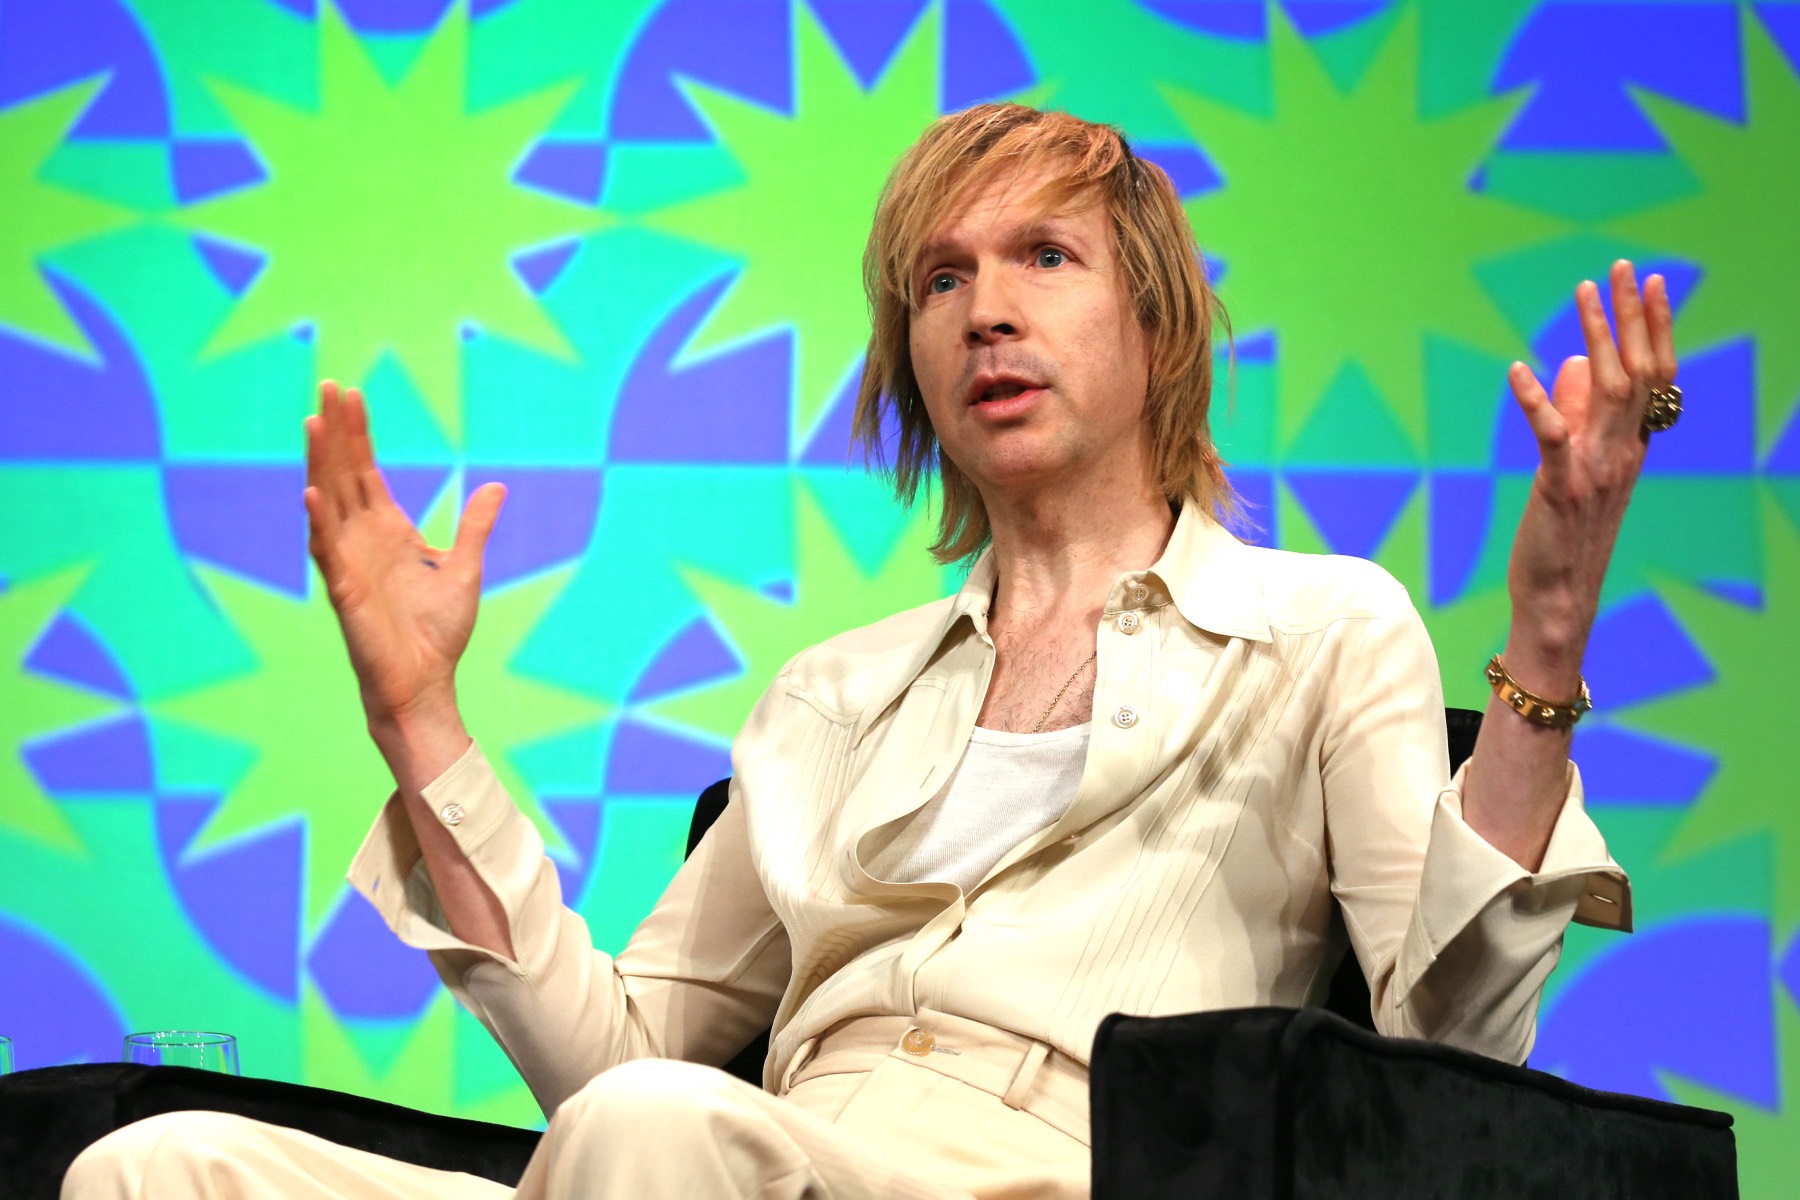 Beck says he’s re-recording “Loser” during the SXSW Keynote Speech